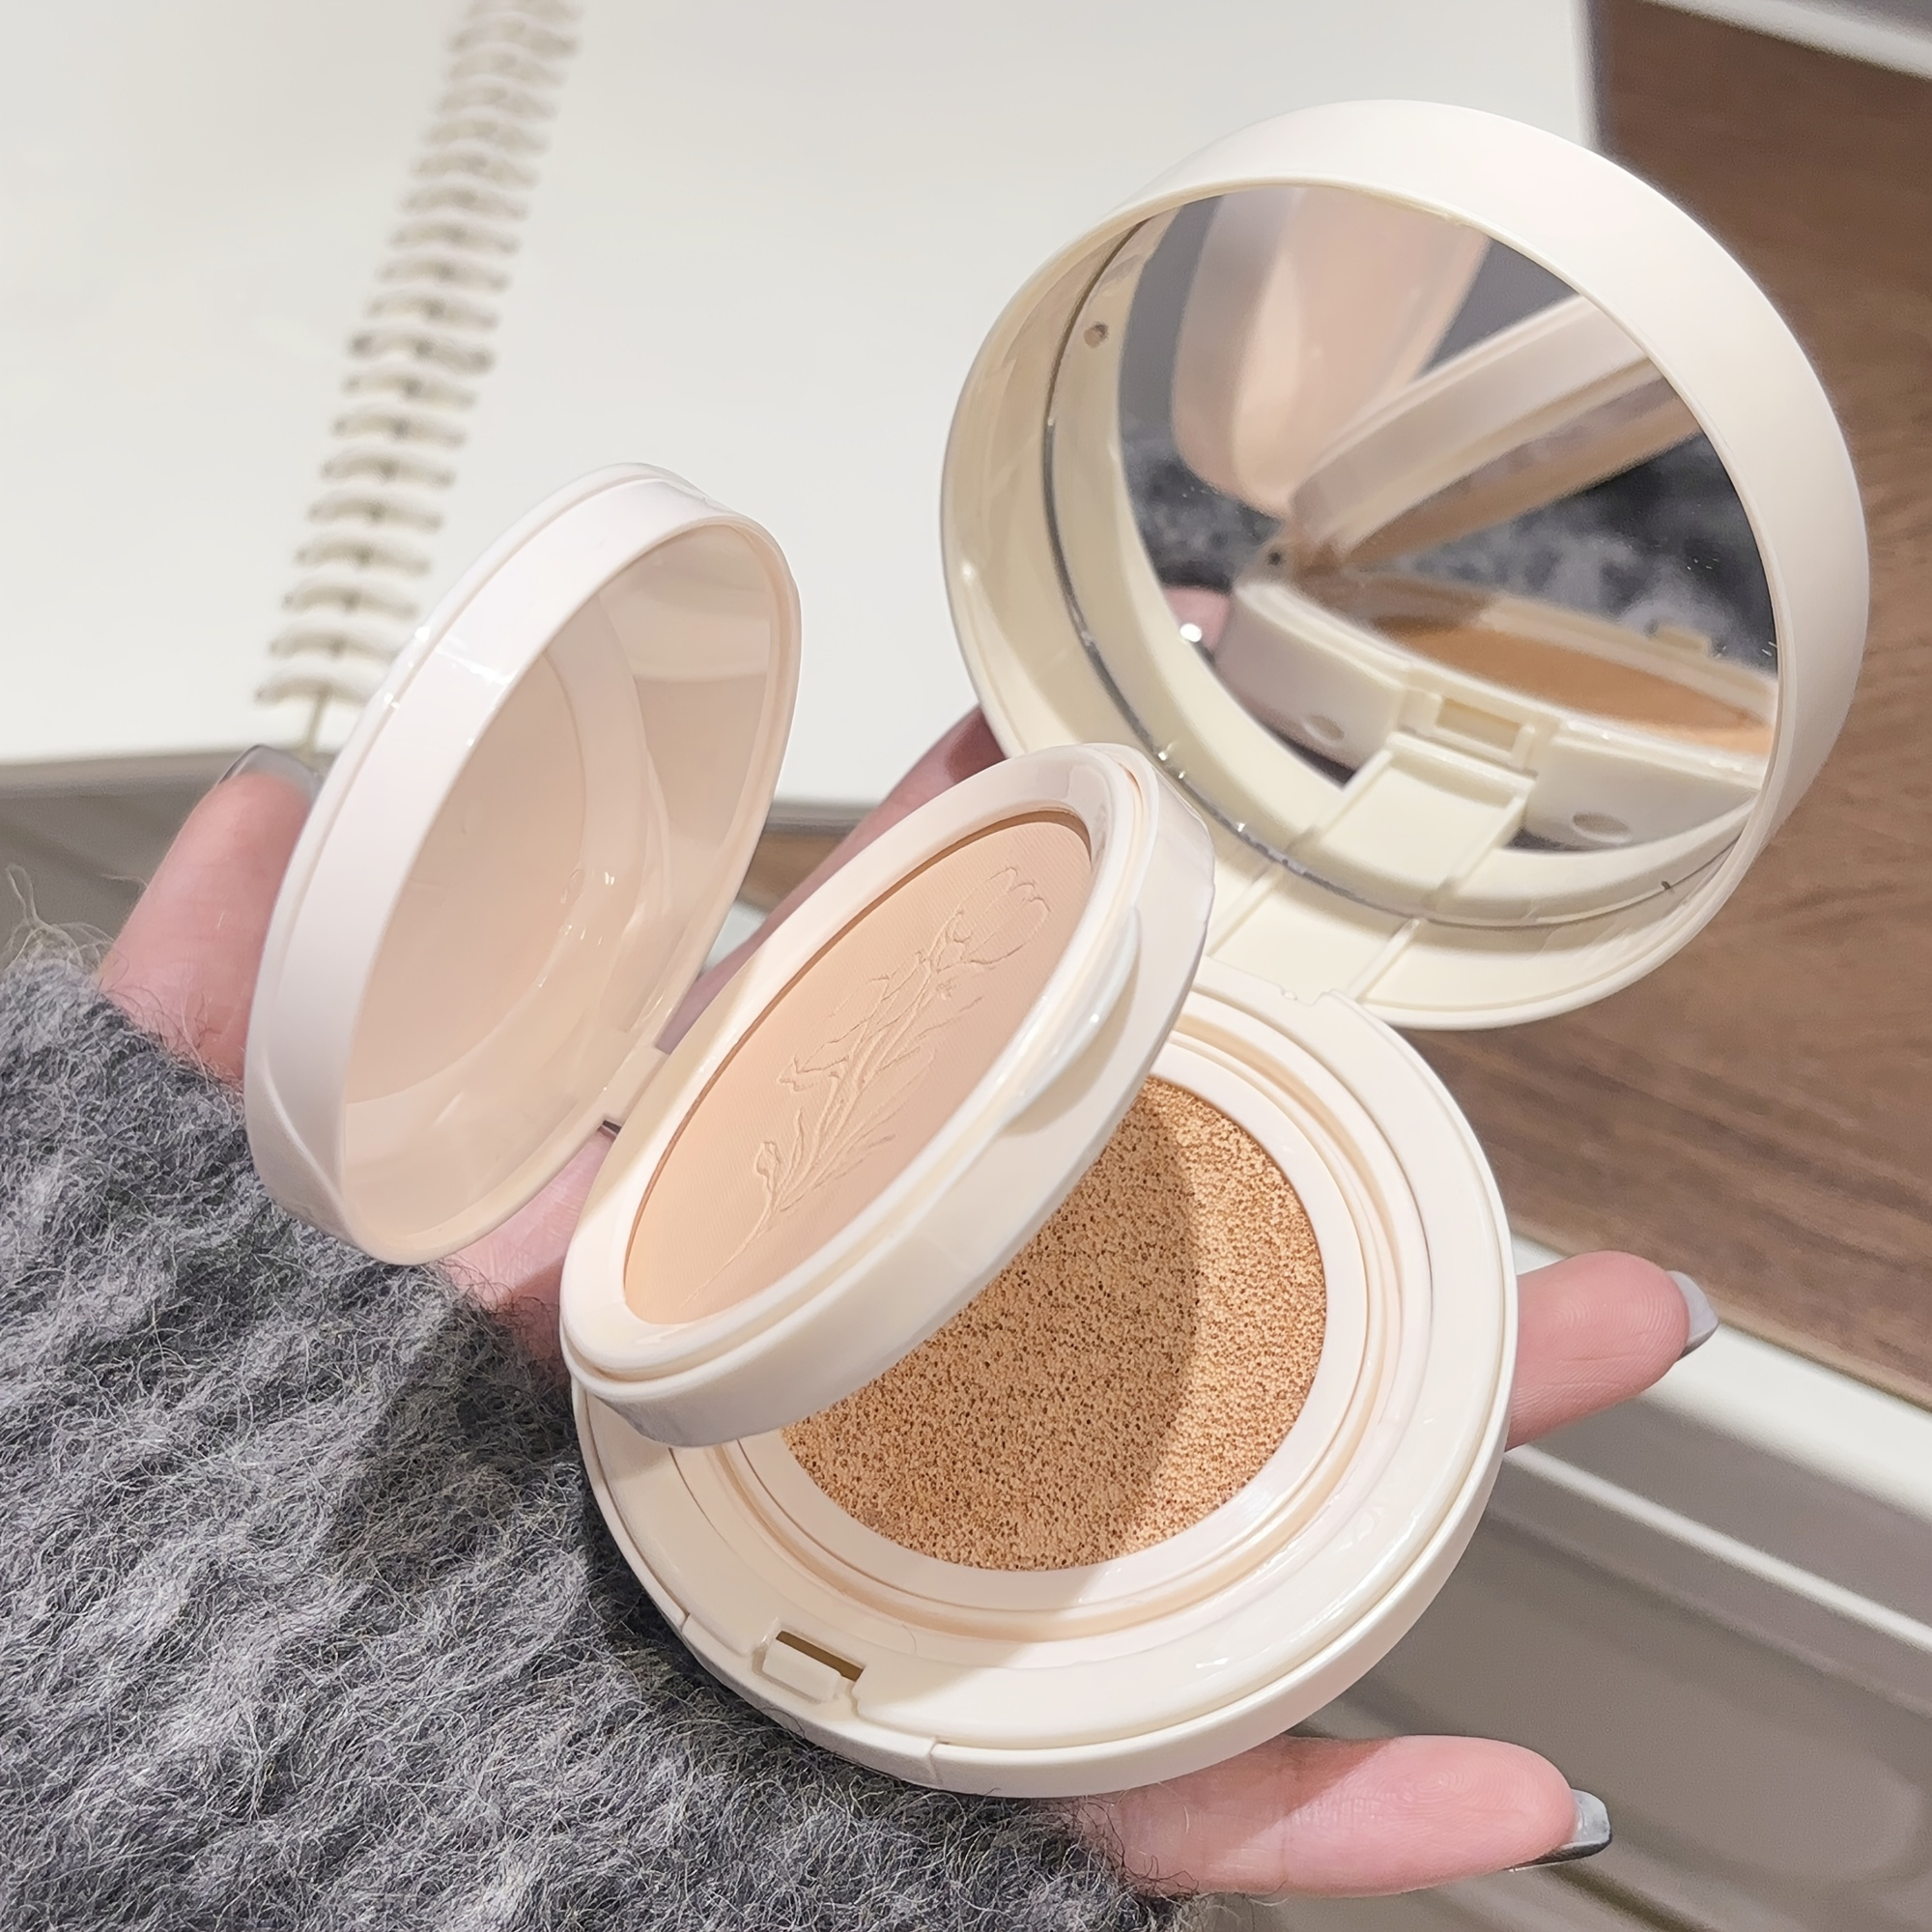 

Compact 2-in-1 Cushion Foundation, Highlighting Oil Control Moisturizing Long-lasting Lightweight Concealer With Dual-layer Portable Air Cushion, Non-caking Pressed Powder Makeup